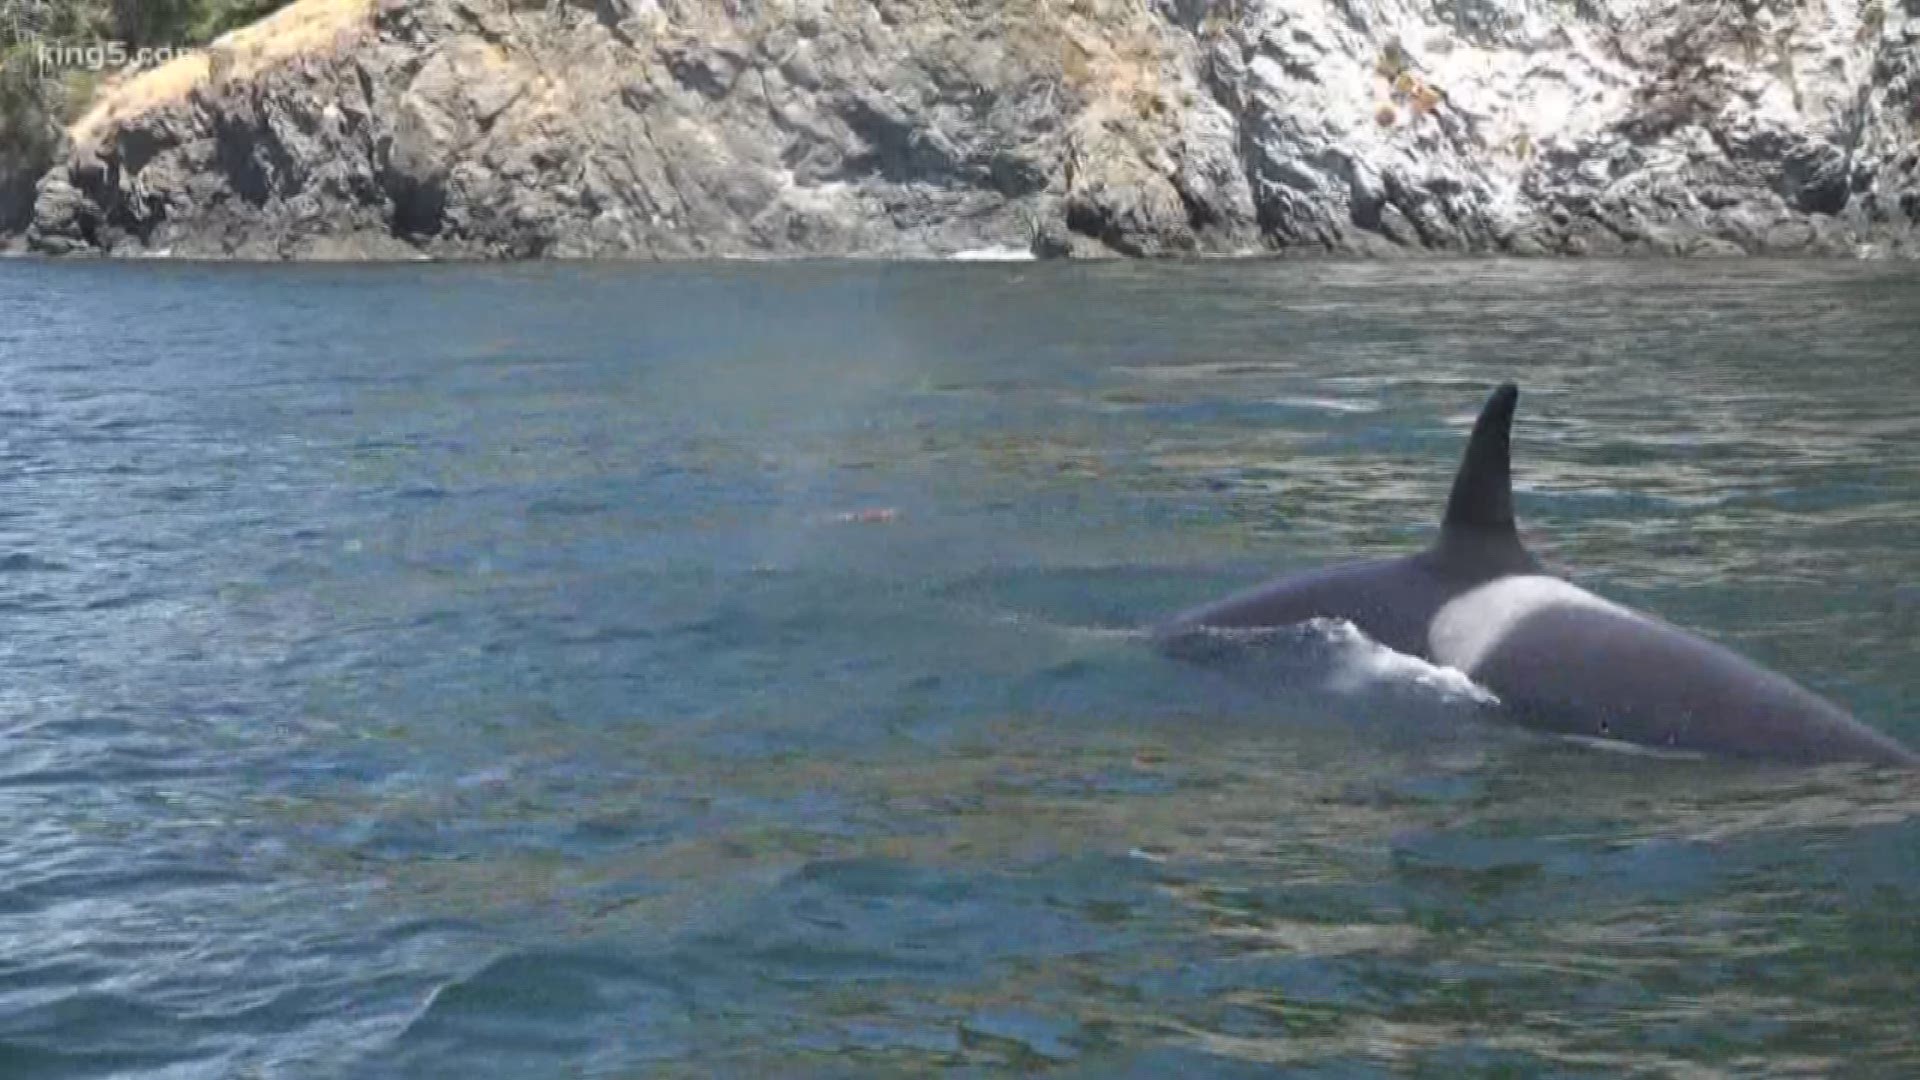 A leading orca expert said if something drastic isn't done soon, we could lose J-pod forever.